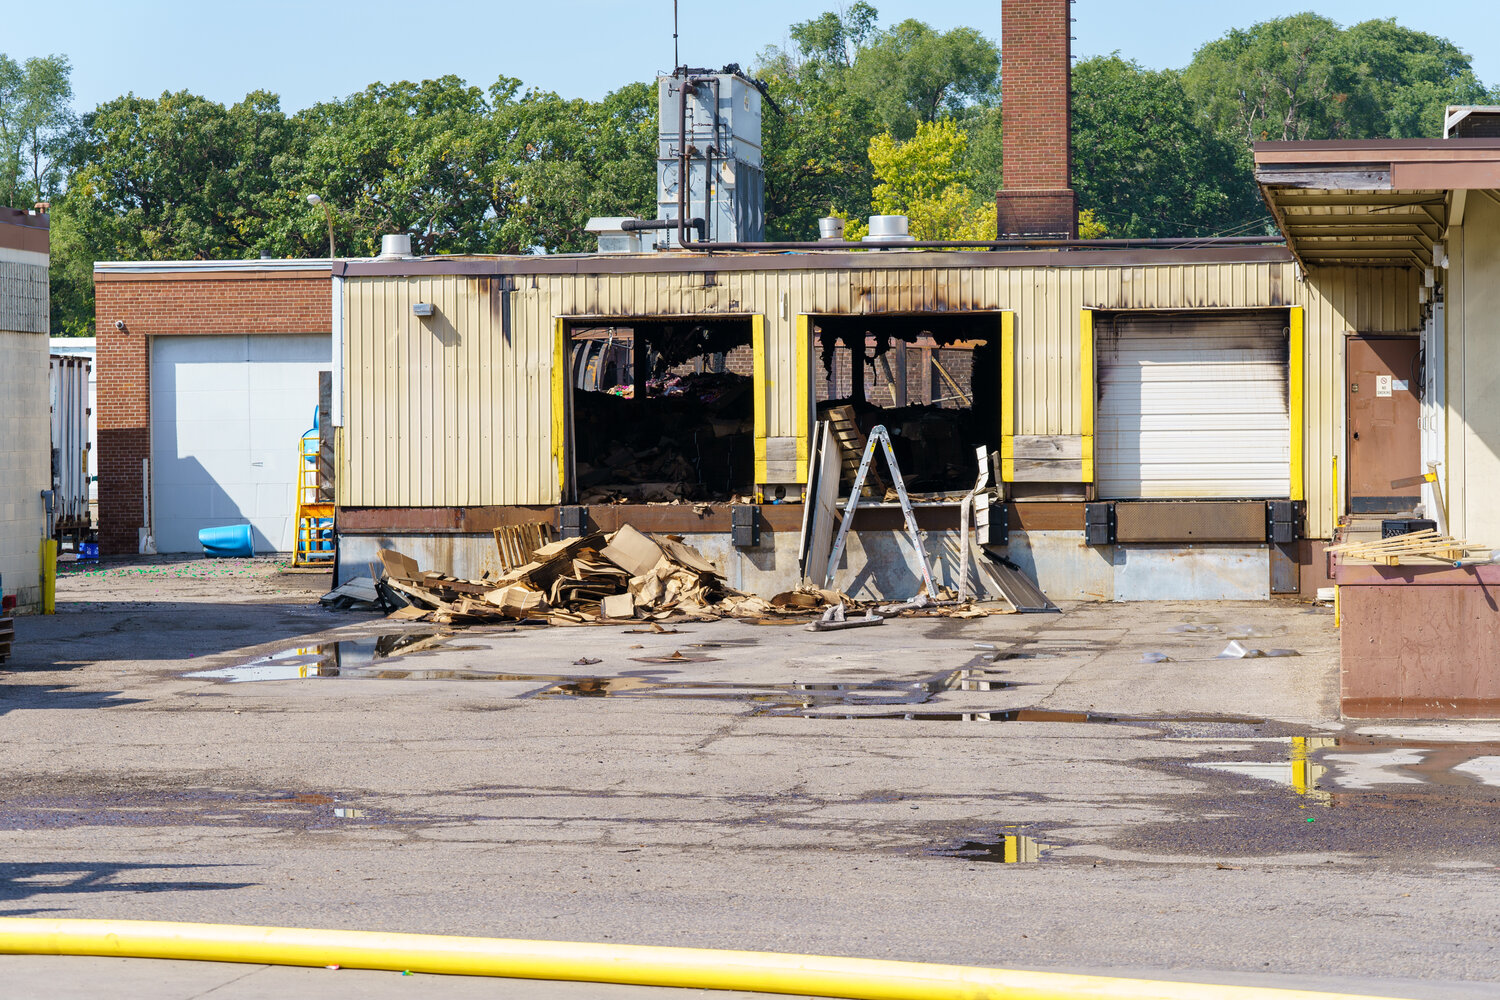 This loading dock was primarily used by trucks returning to the creamery with empty crates when the creamery was in operation. As you can see from the image, there are piles and piles of cardboard boxes on the docks that added to the fuel for the fire.